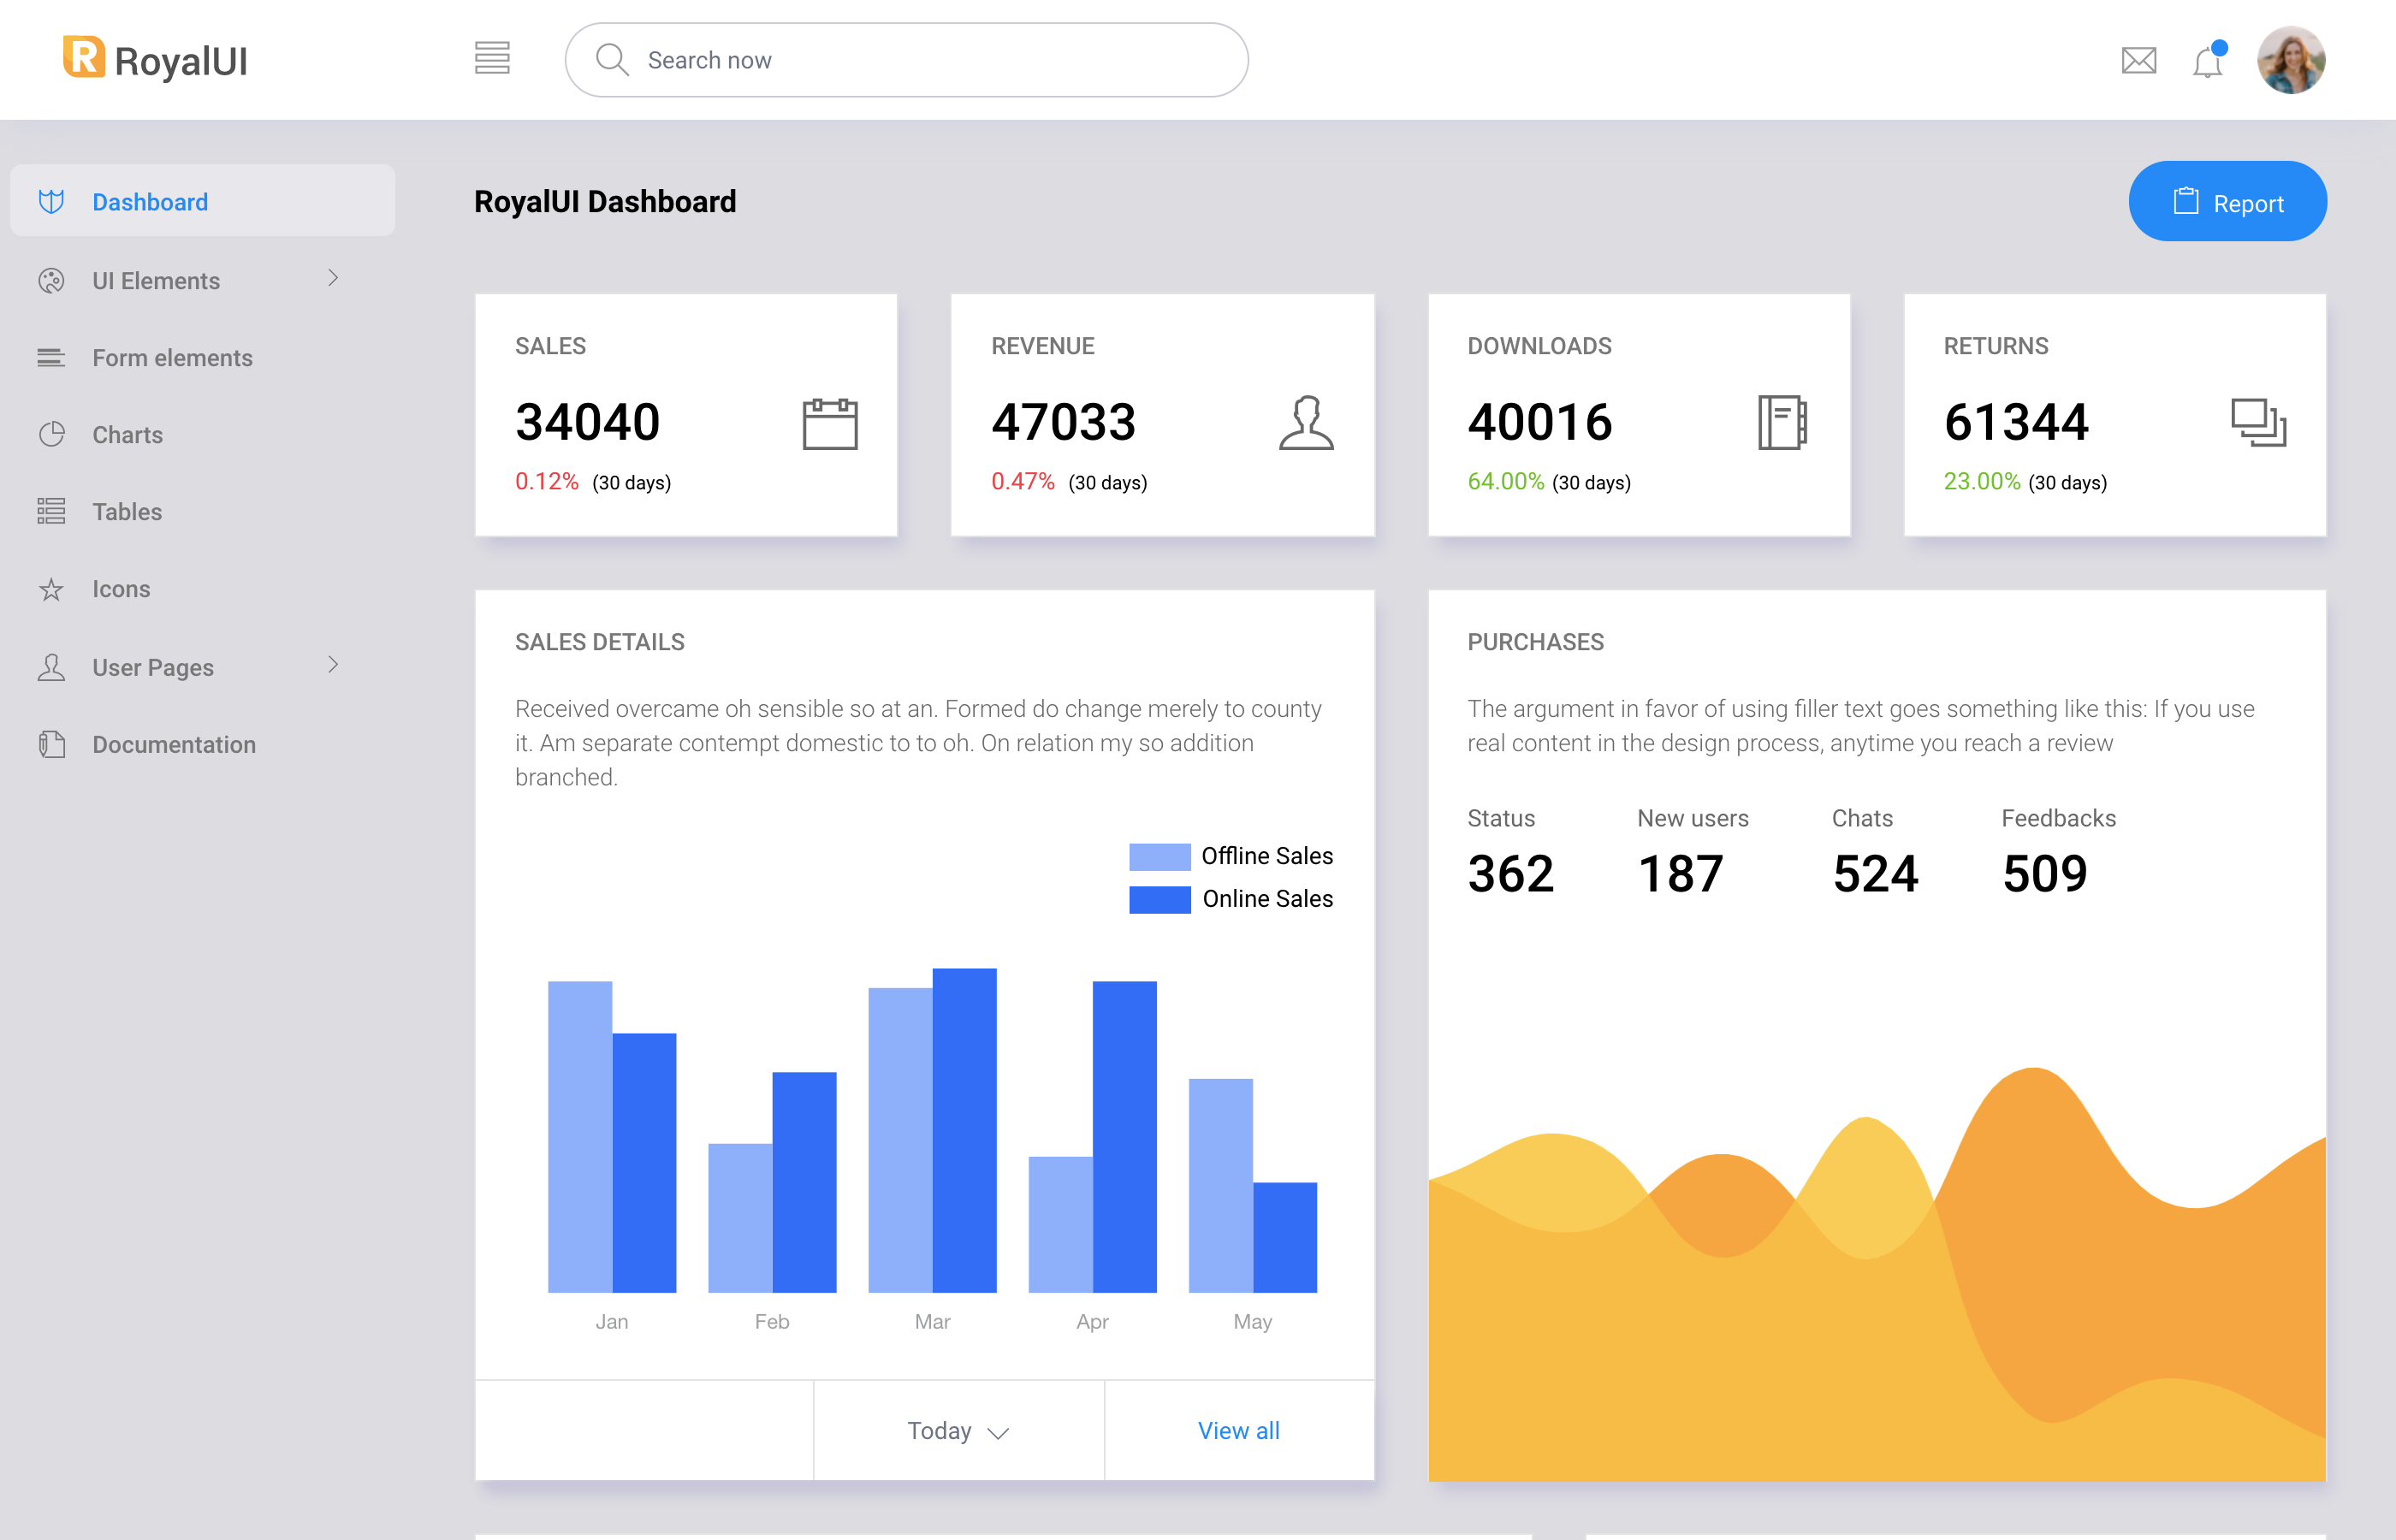 Royal is a free Bootstrap admin template created by bootstrapdash